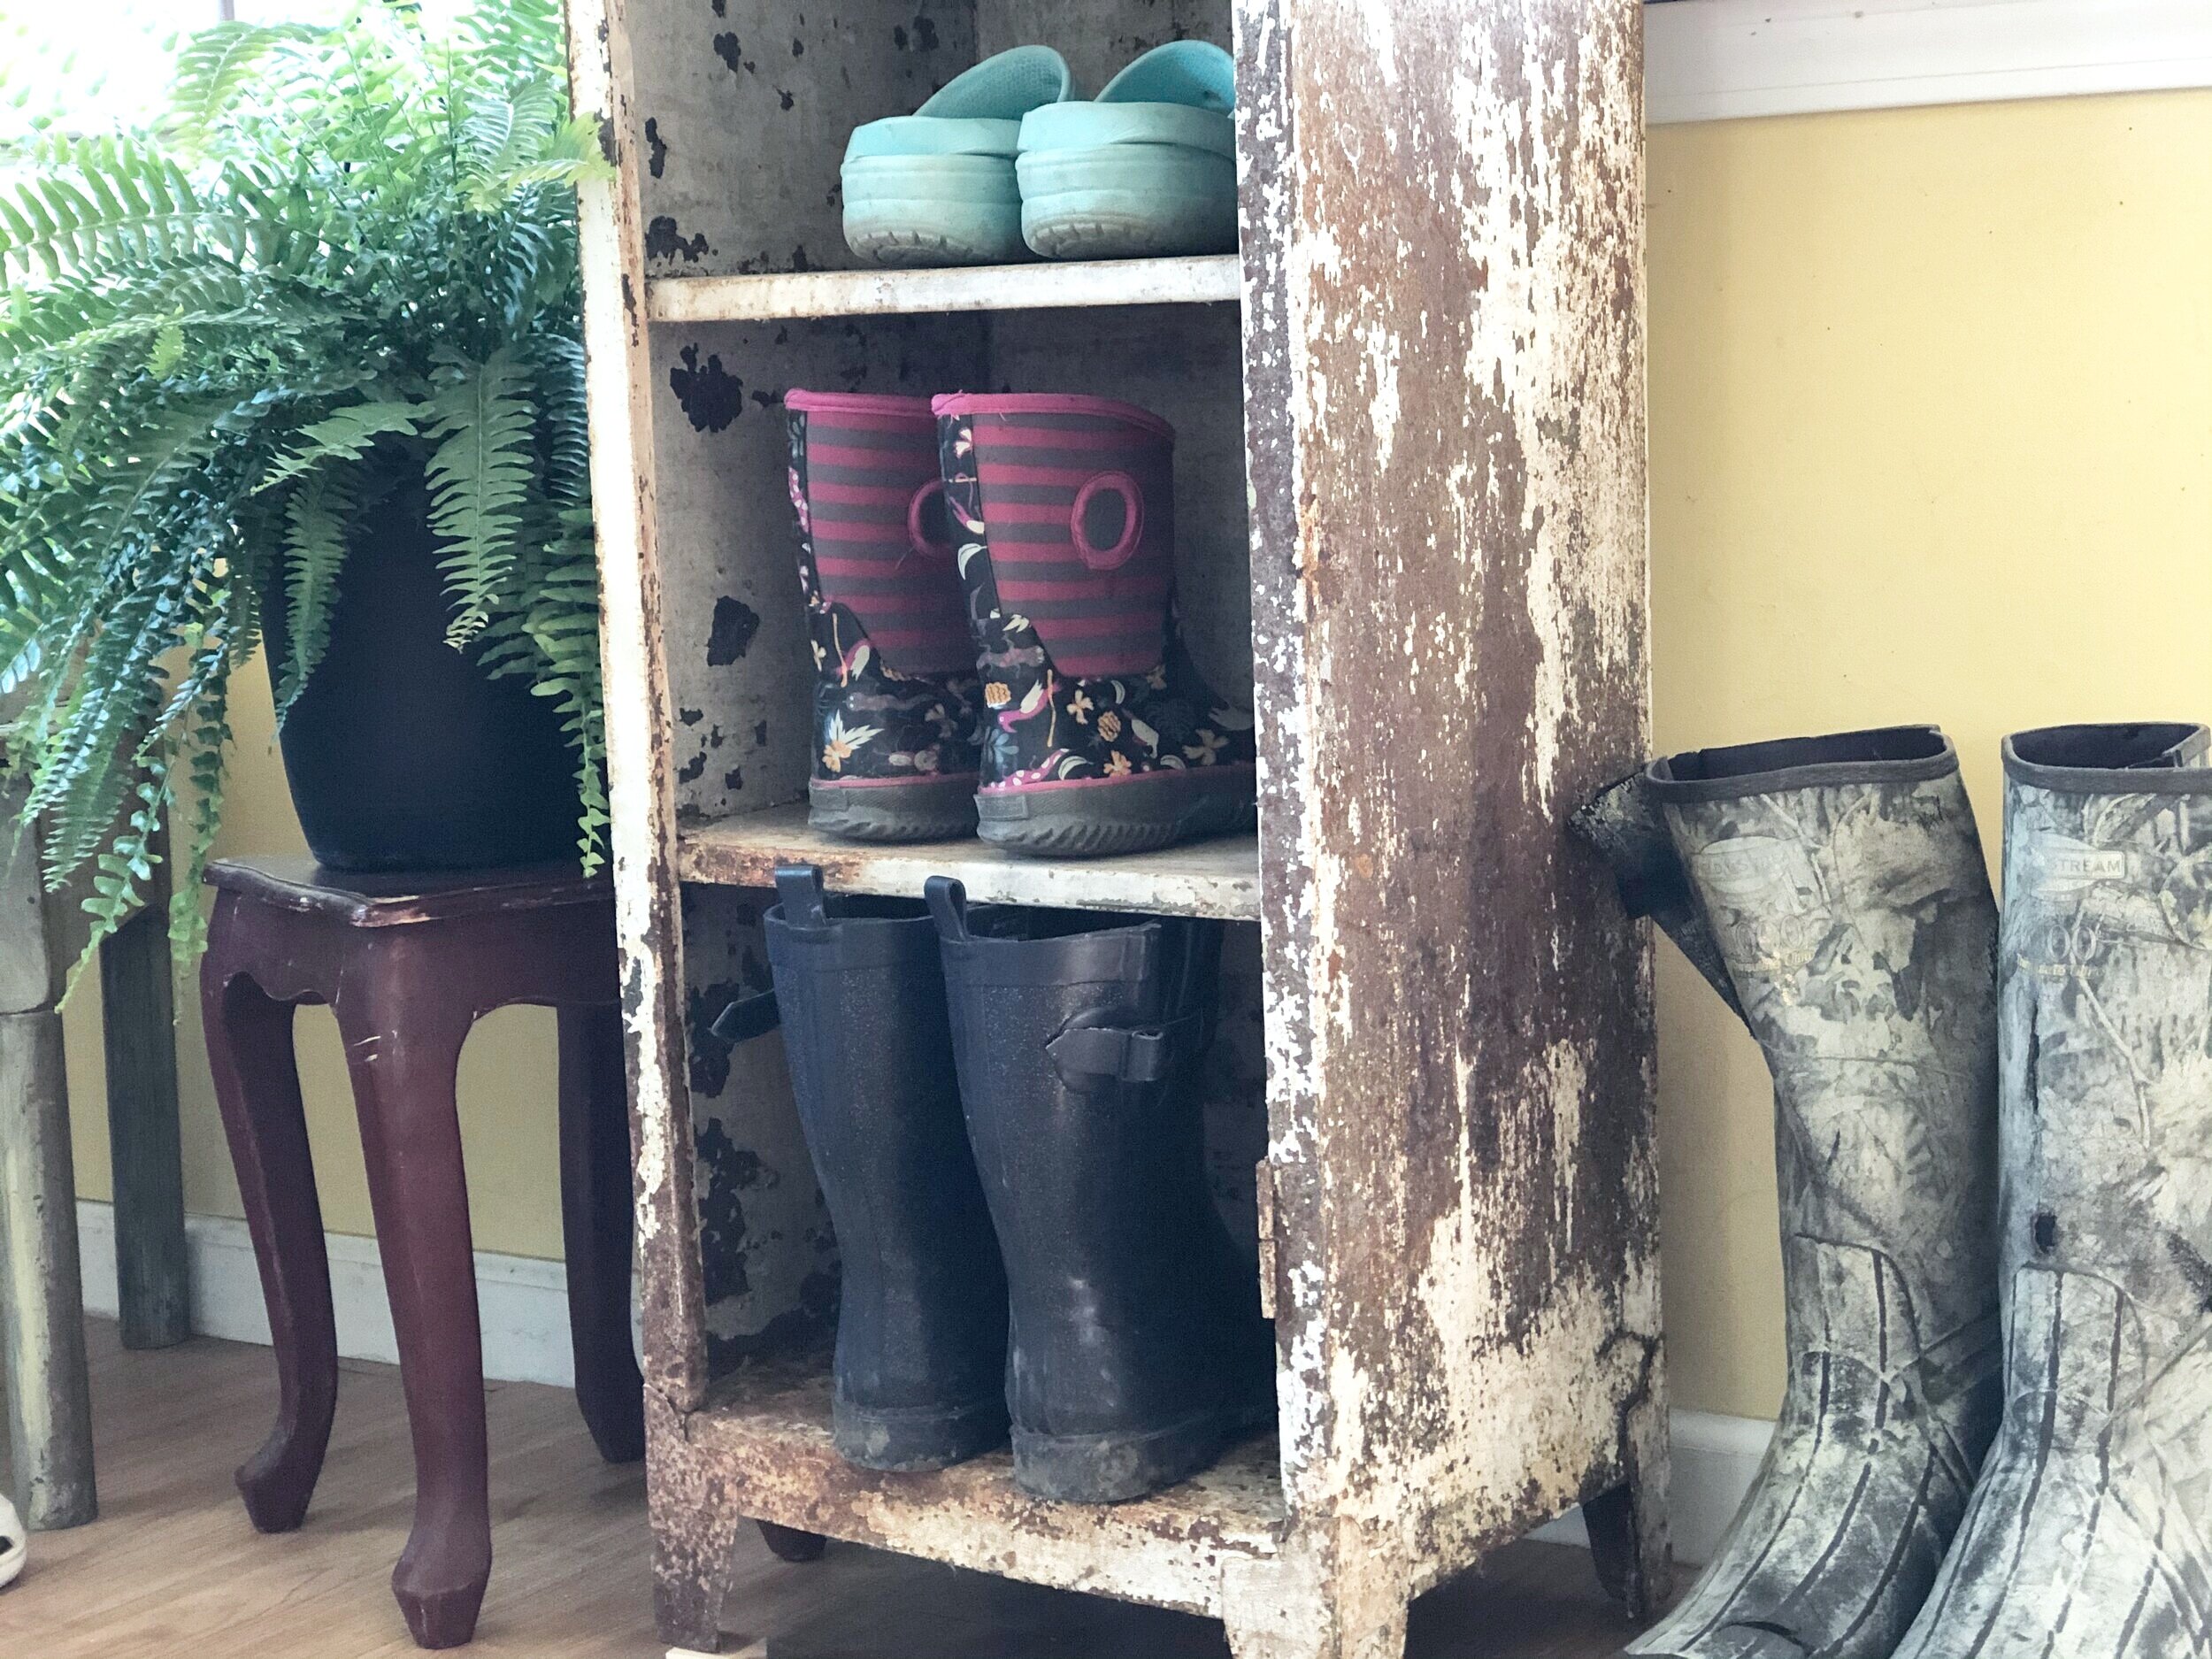 Rusty locker / metal cabinet repurposed for a mudroom sunporch. Turn an antique chipped paint locker into a shoe holder for your mudroom. Frugal rustic farmhouse furniture for your storage needs.